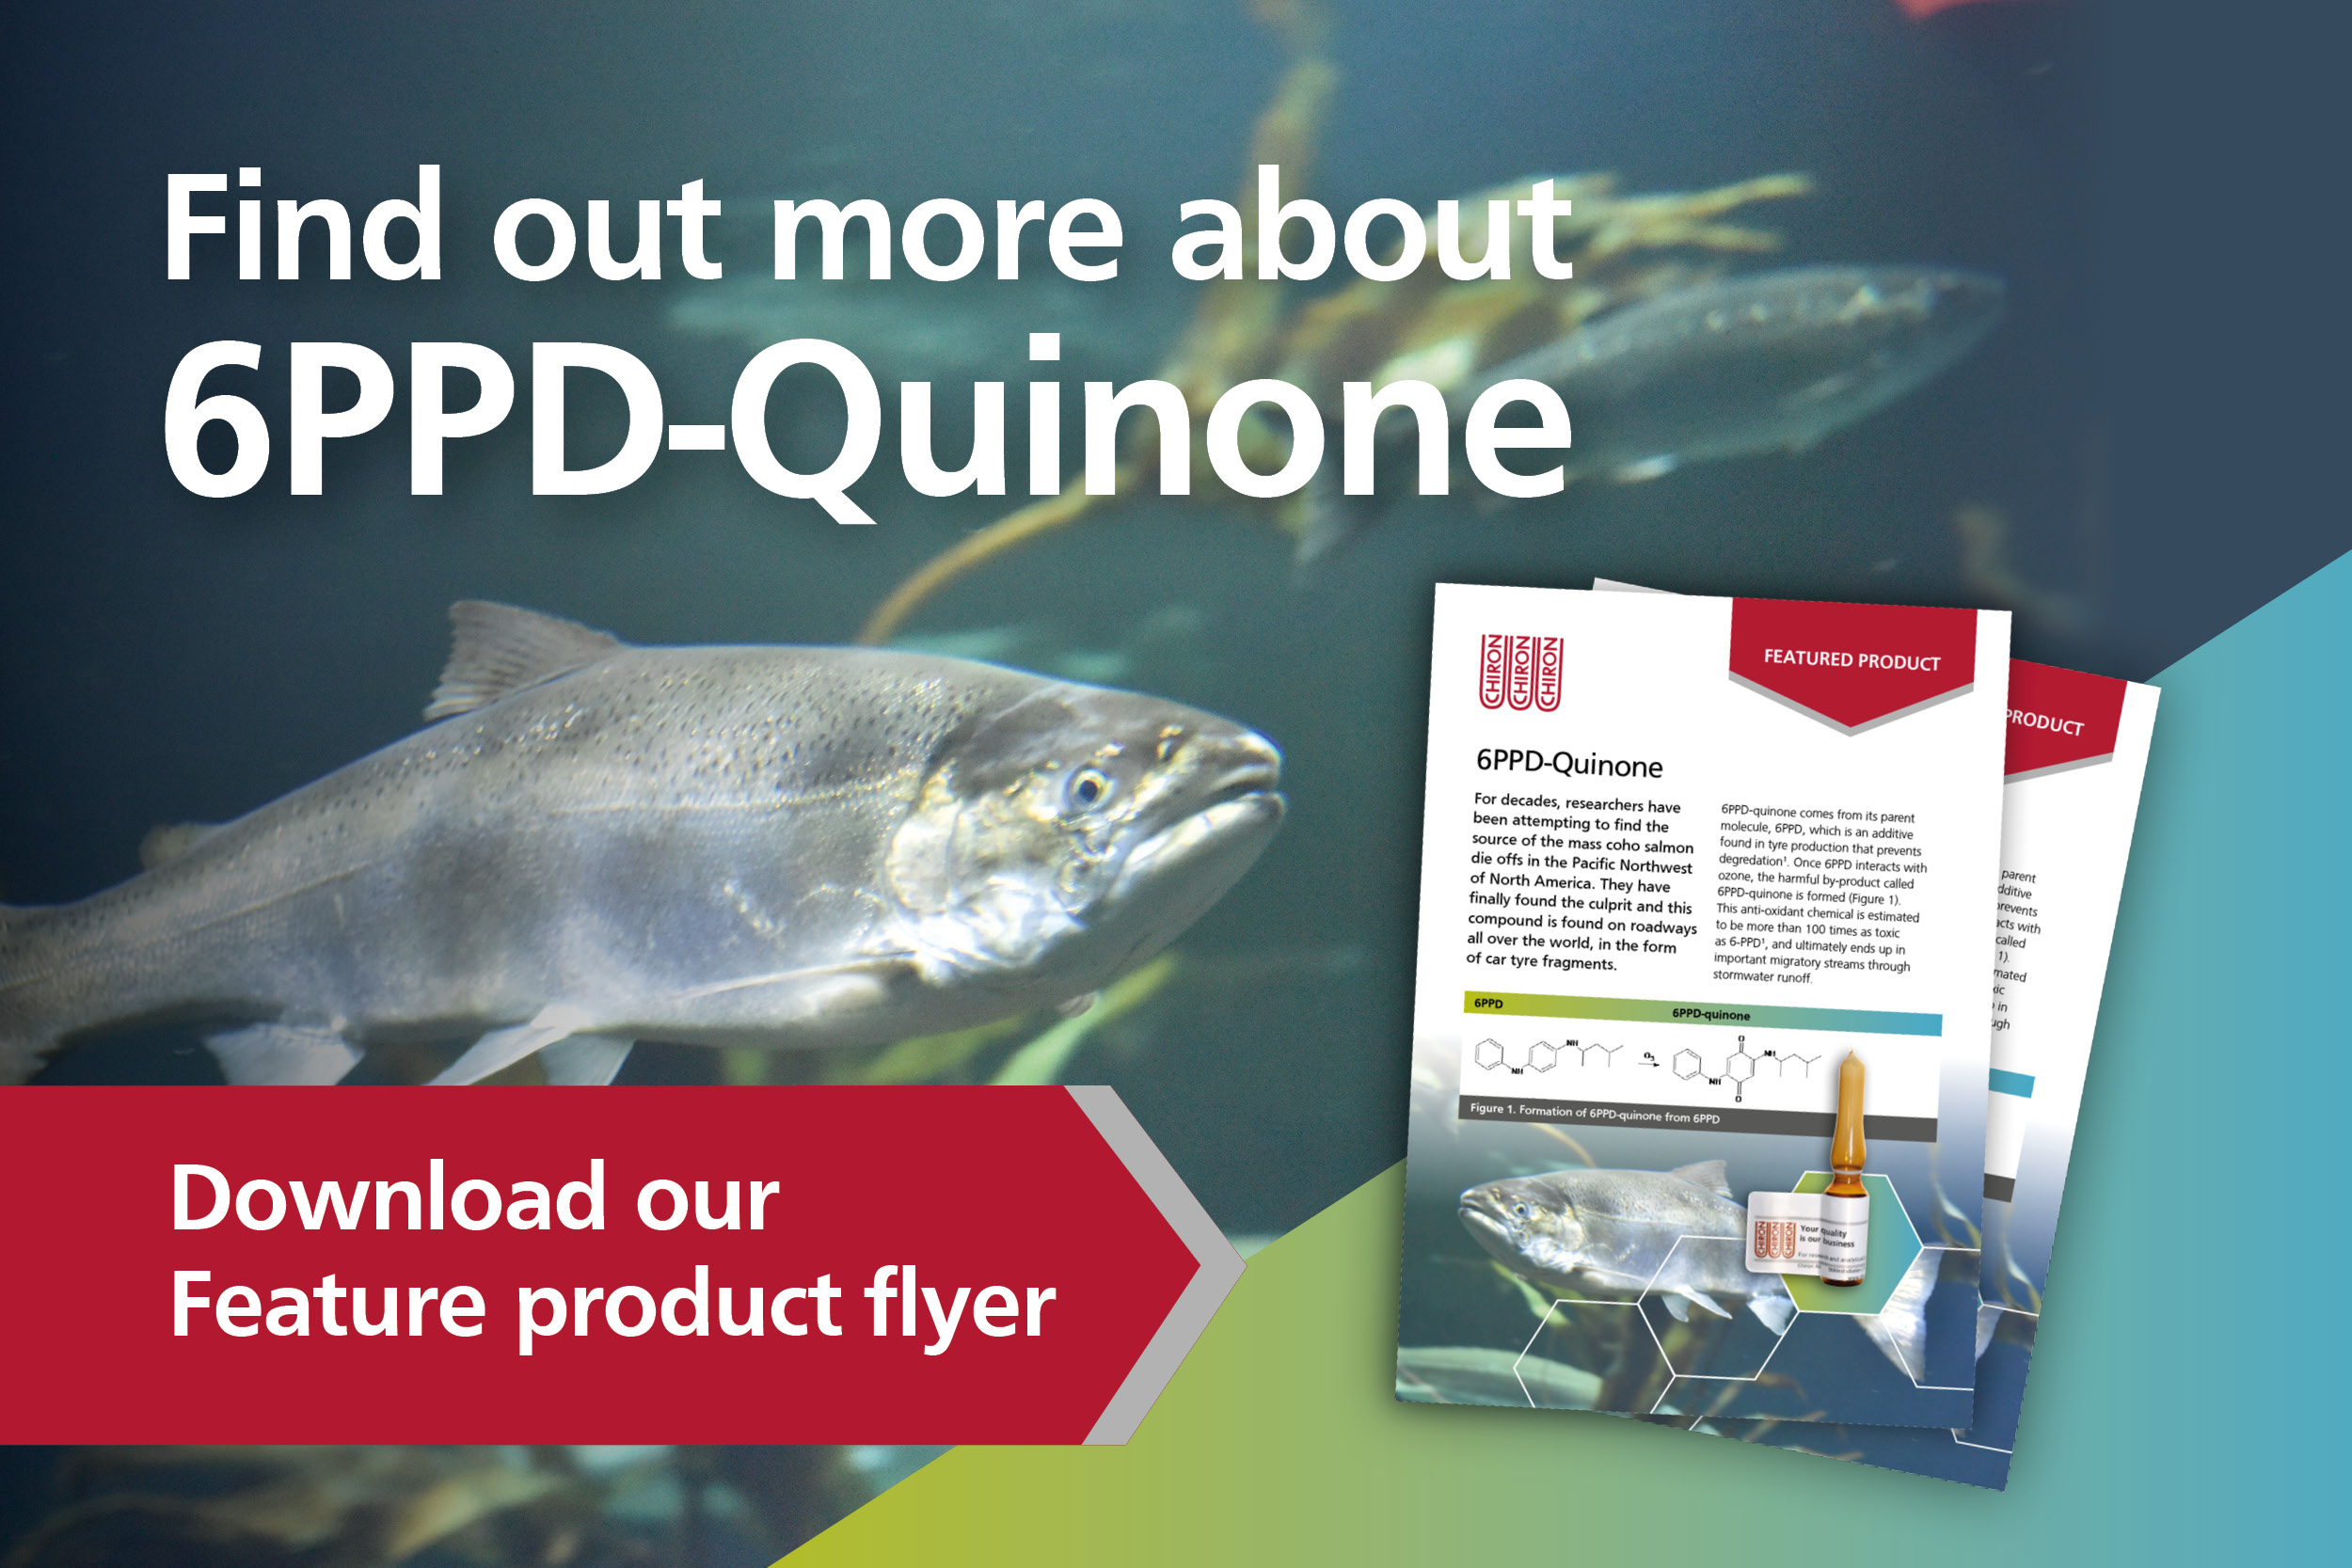 Featured Product: 6PPD-Quinone